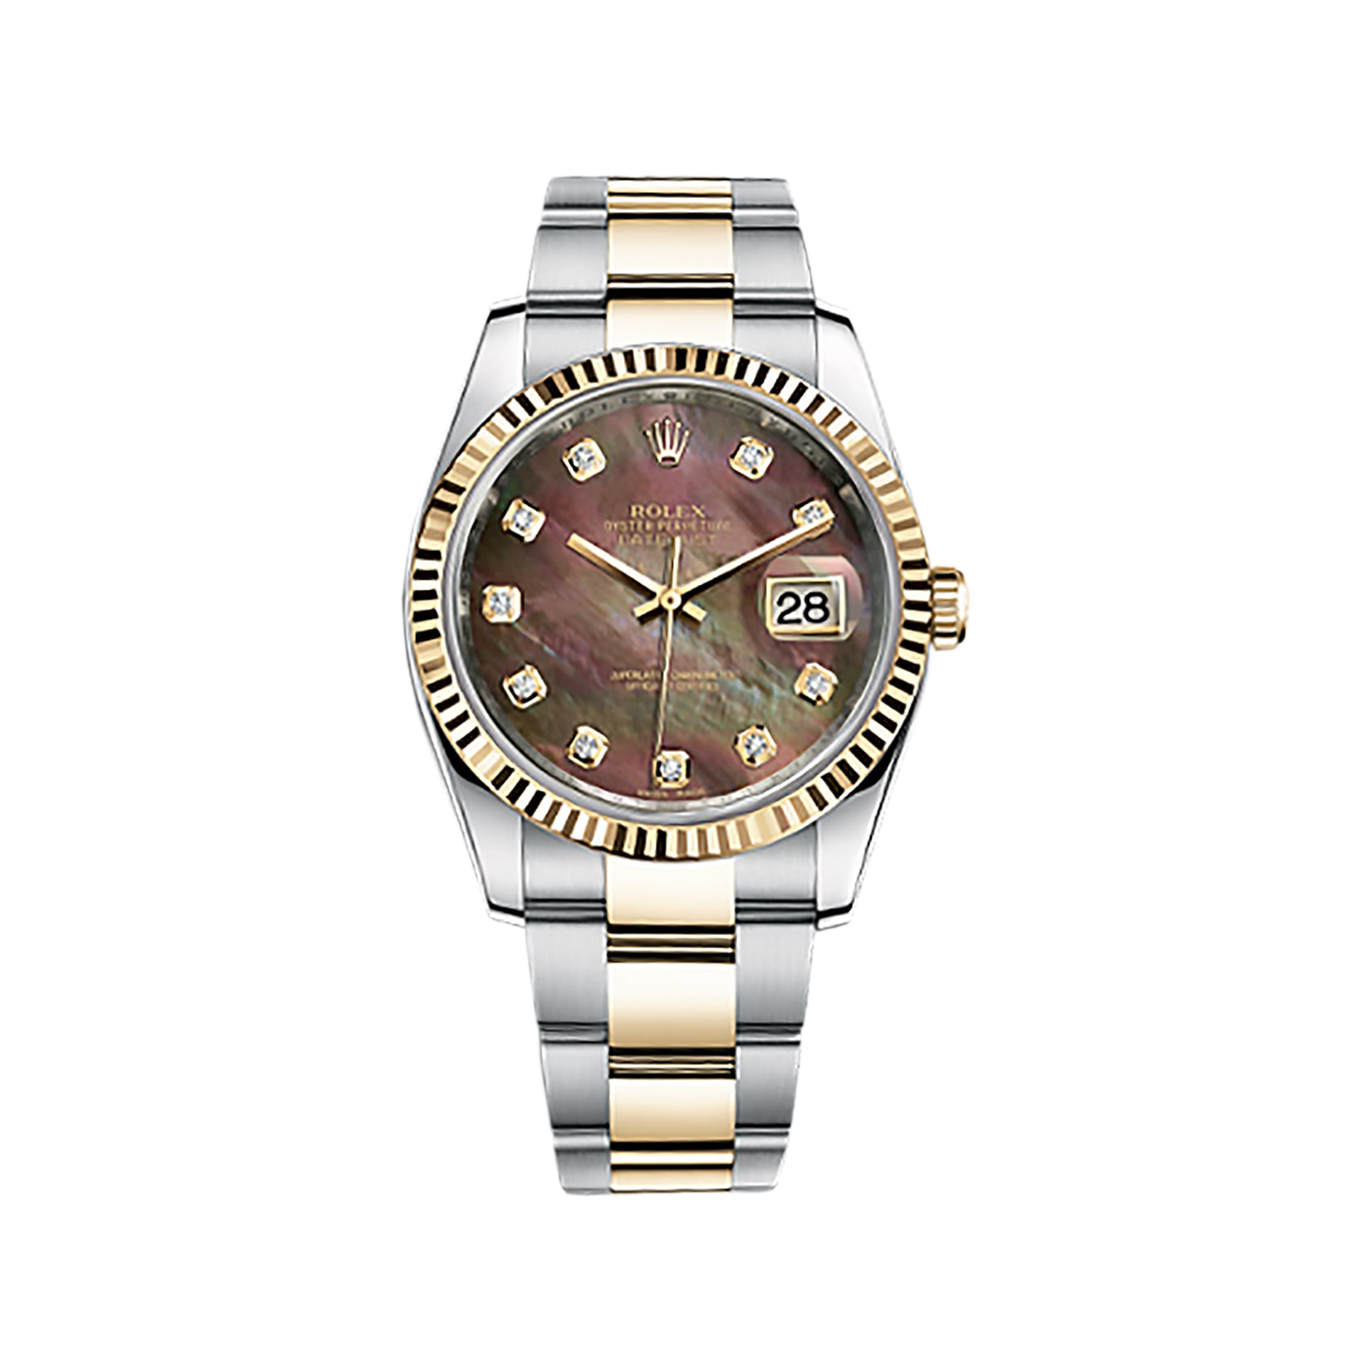 Datejust 36 116233 Gold & Stainless Steel Watch (Black Mother-of-Pearl Set with Diamonds) - Click Image to Close